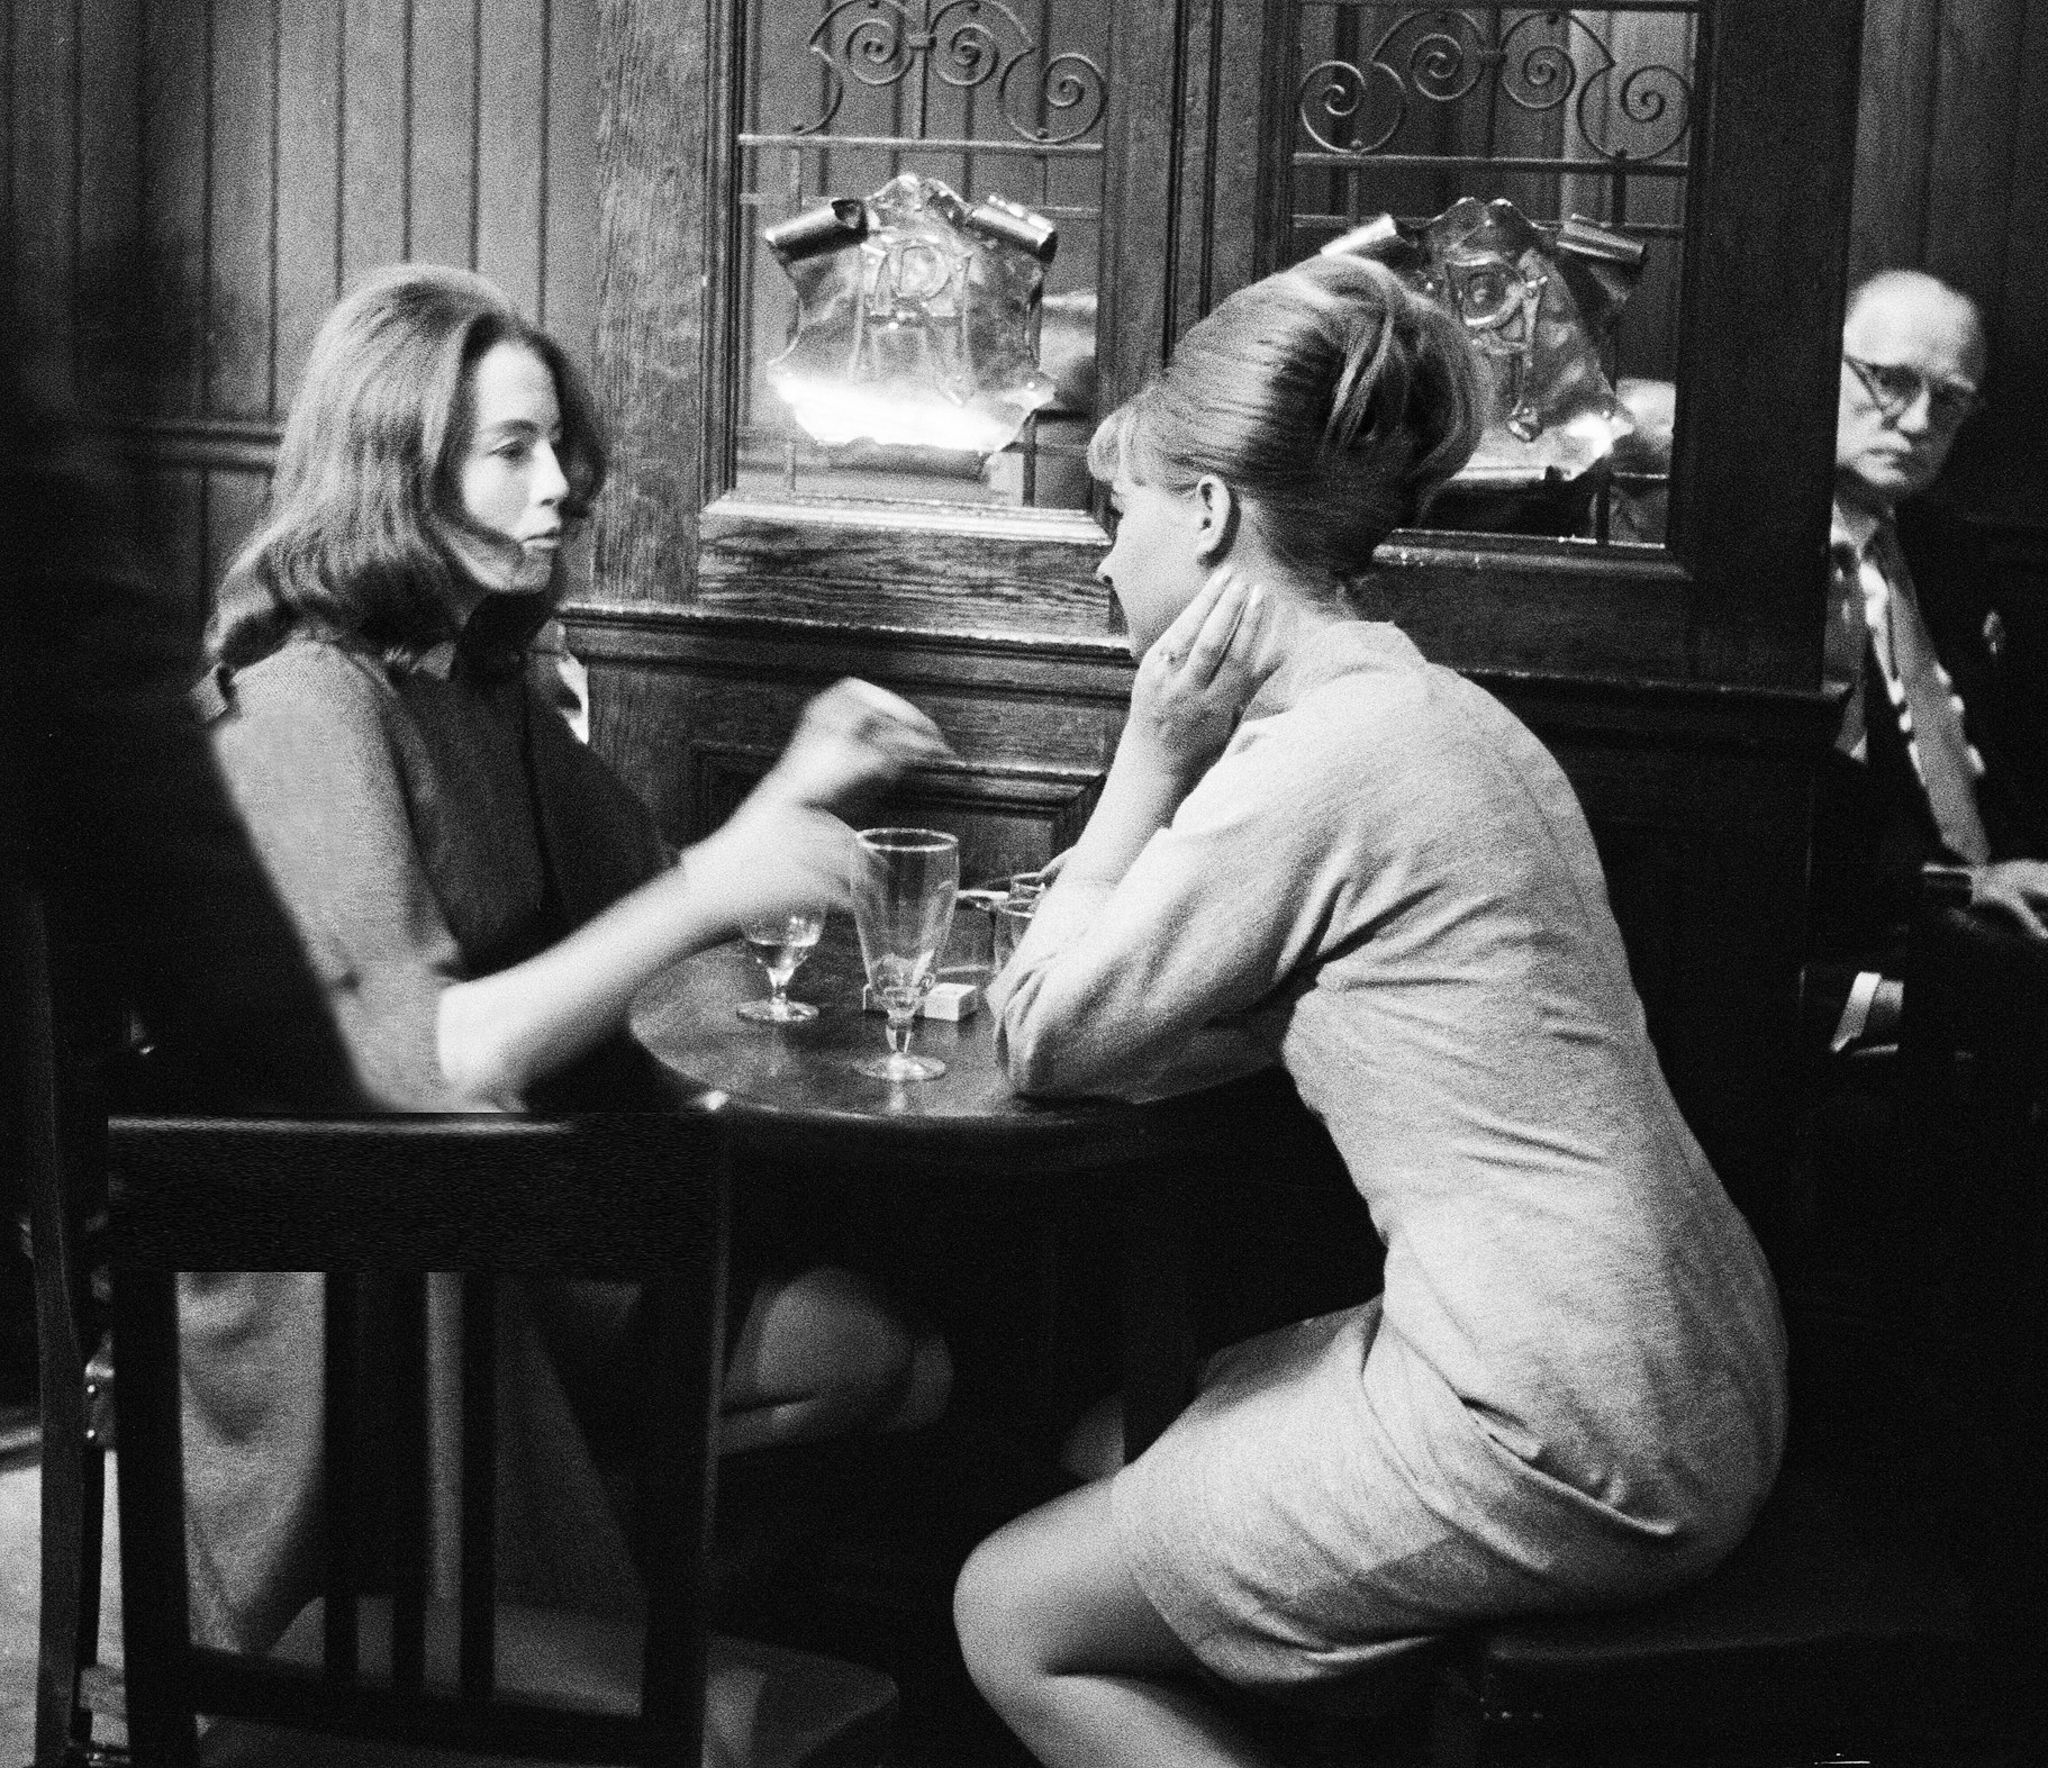 Christine Keeler and Mandy Rice - Davies taking a break from the trial of society osteopath Stephen Ward at the Old Bailey on Monday 22nd July 1963.